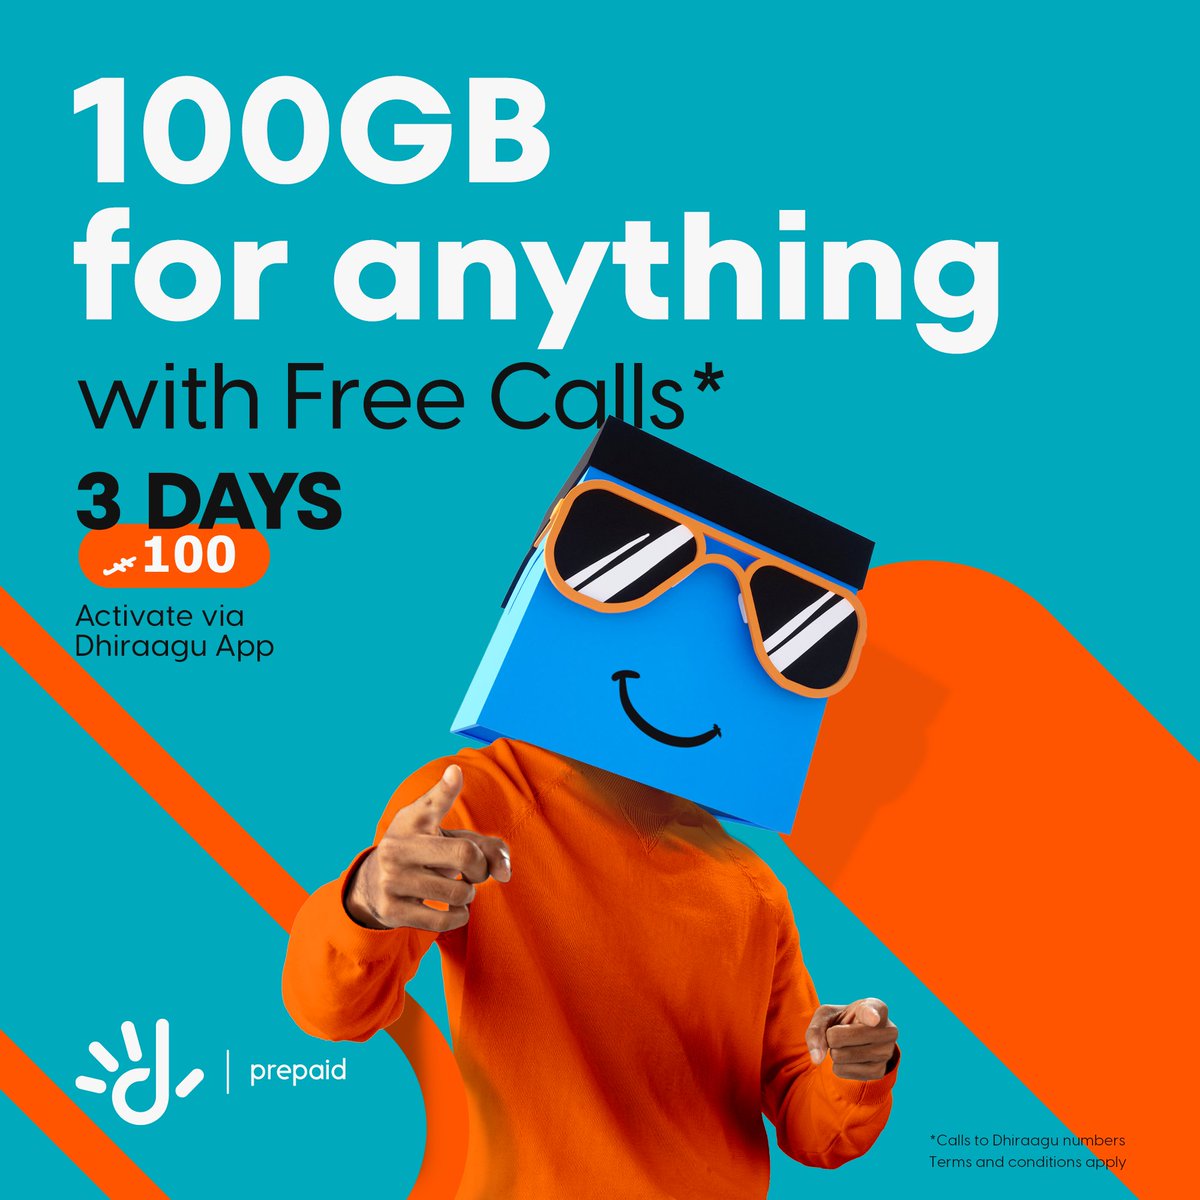 Enjoy 100GB for anything! Now with unlimited calls to Dhiraagu numbers 😱 ✨ 100 GB for only MVR 100 ✨ 🔸 3 days validity Avahah activate kollaa 👉🏽 bit.ly/Dhiraagu-App Learn more 👉🏽 bit.ly/100geDataPacks #100geDataPacks 🔥